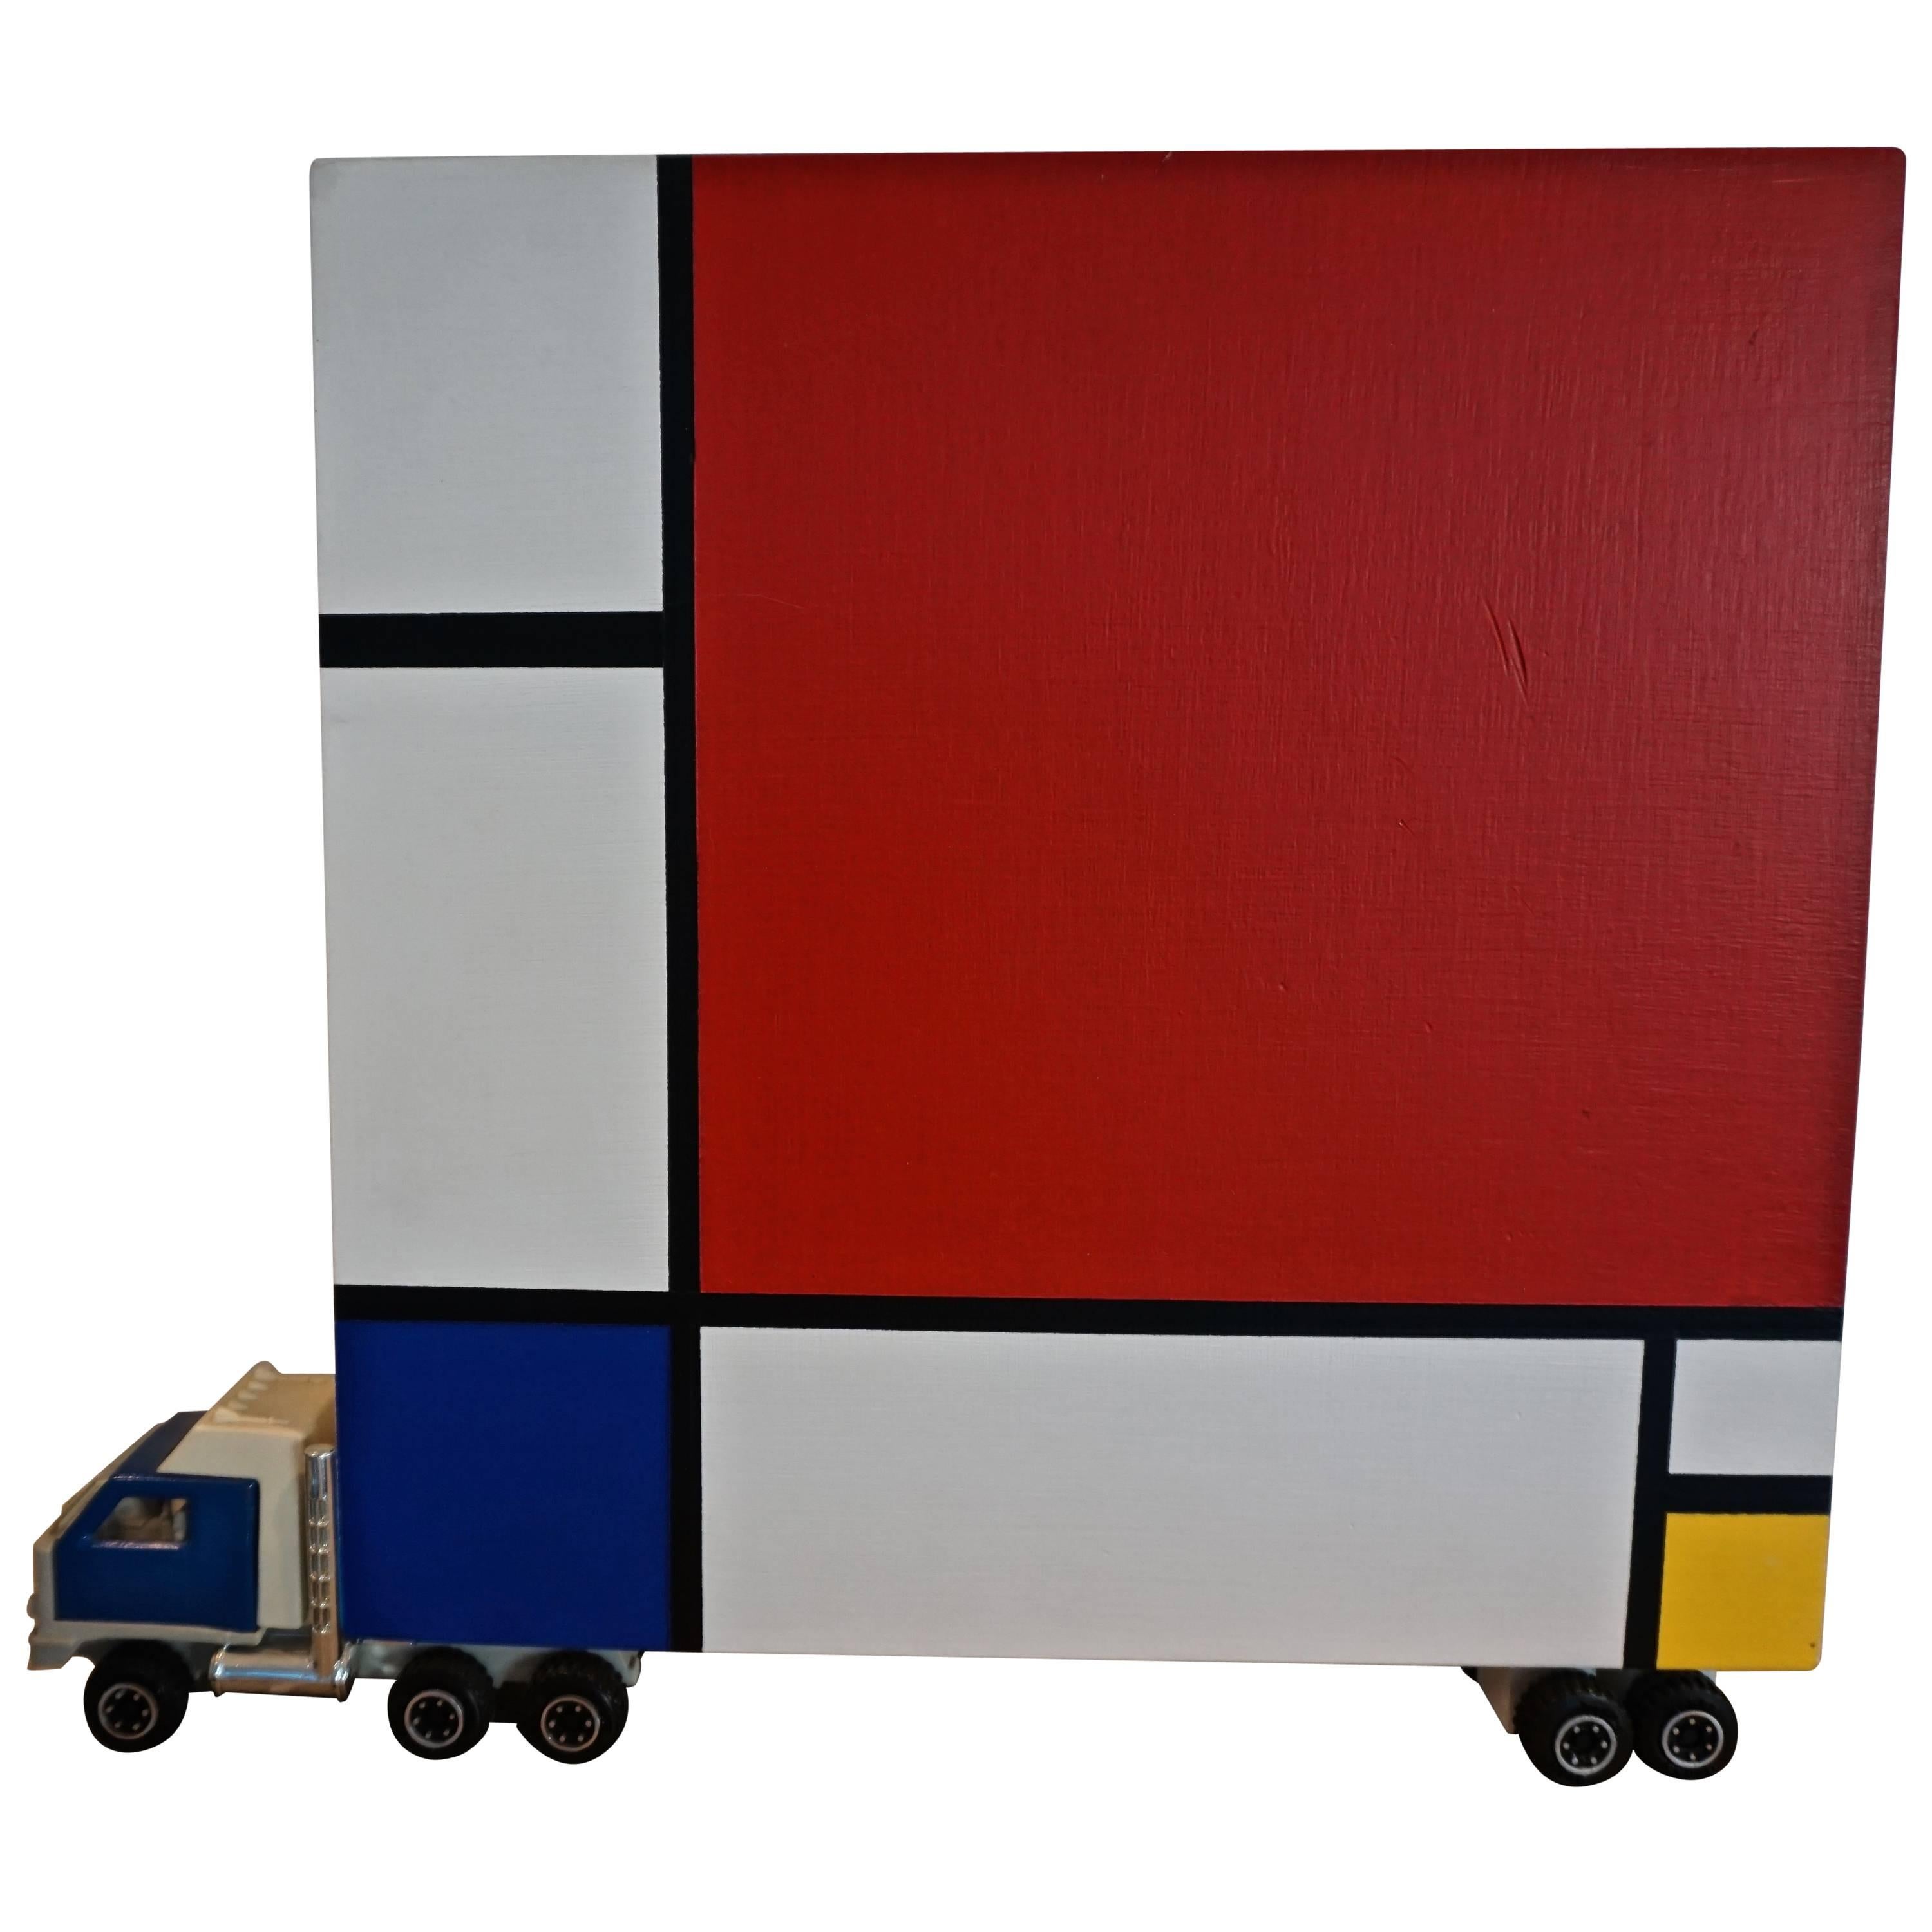 "Homage to Mondrian" by Bruce Houston